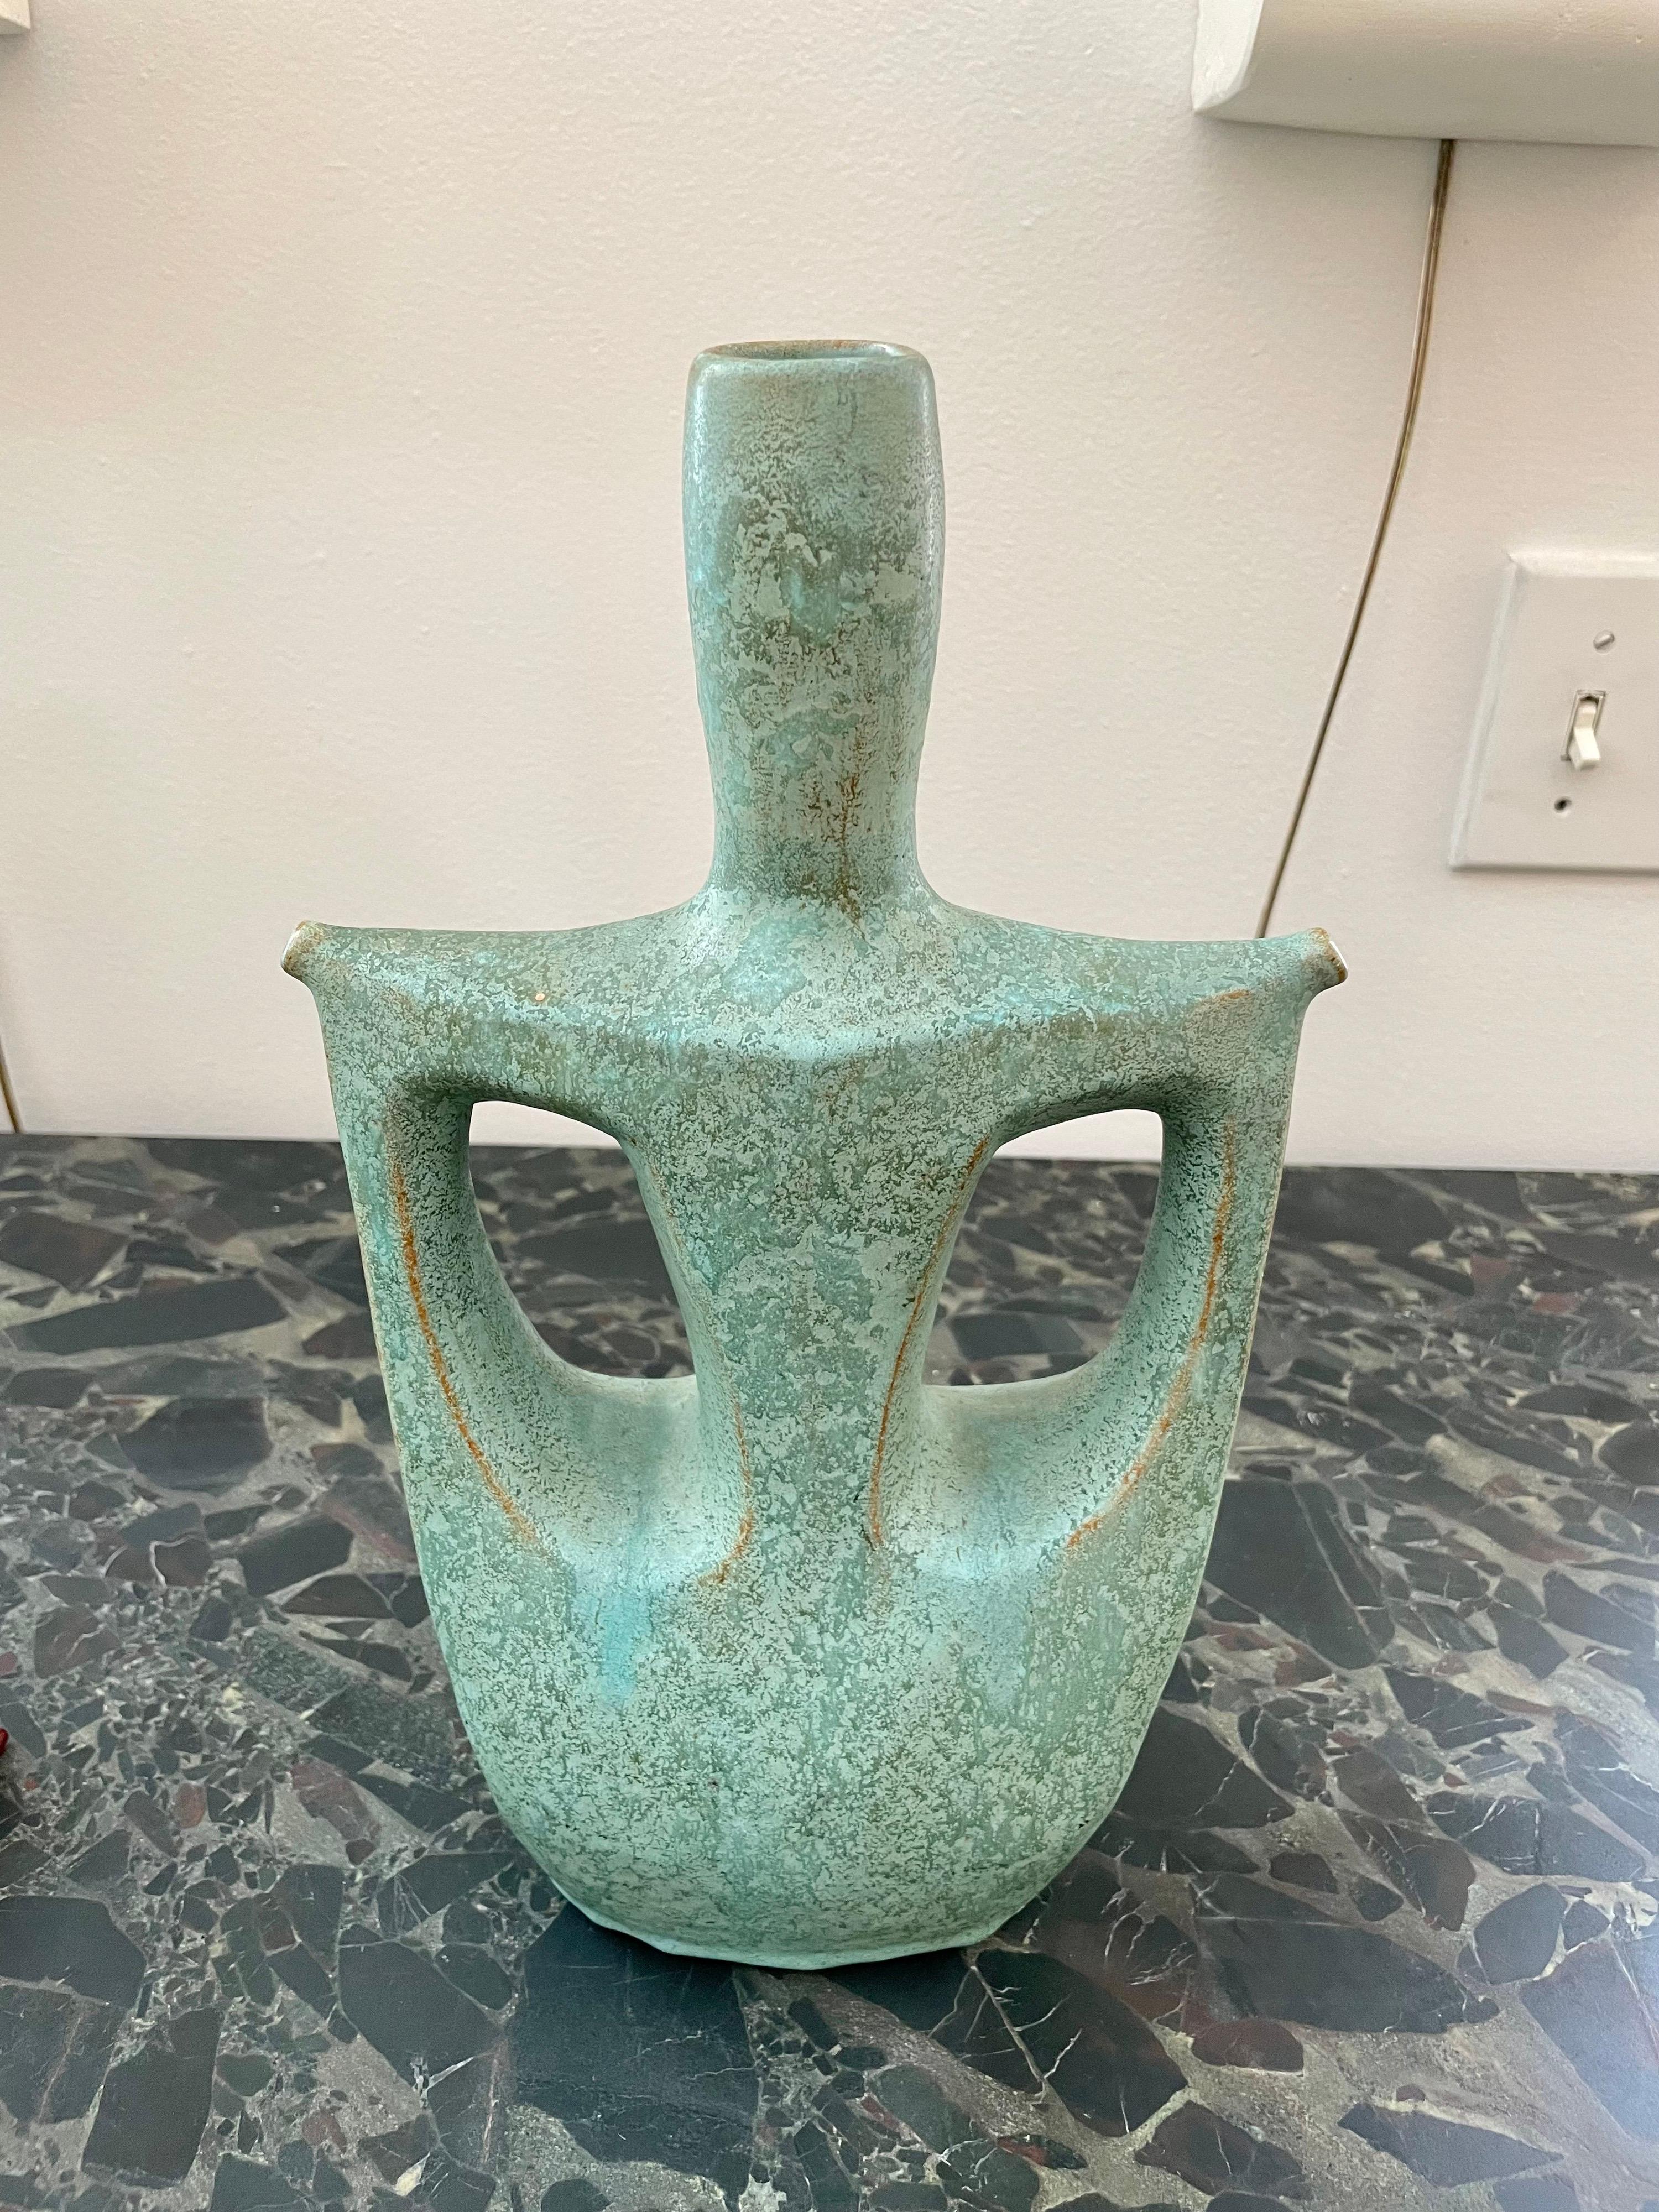 Vintage Amphora Turquoise Pottery Vase In Good Condition For Sale In East Hampton, NY